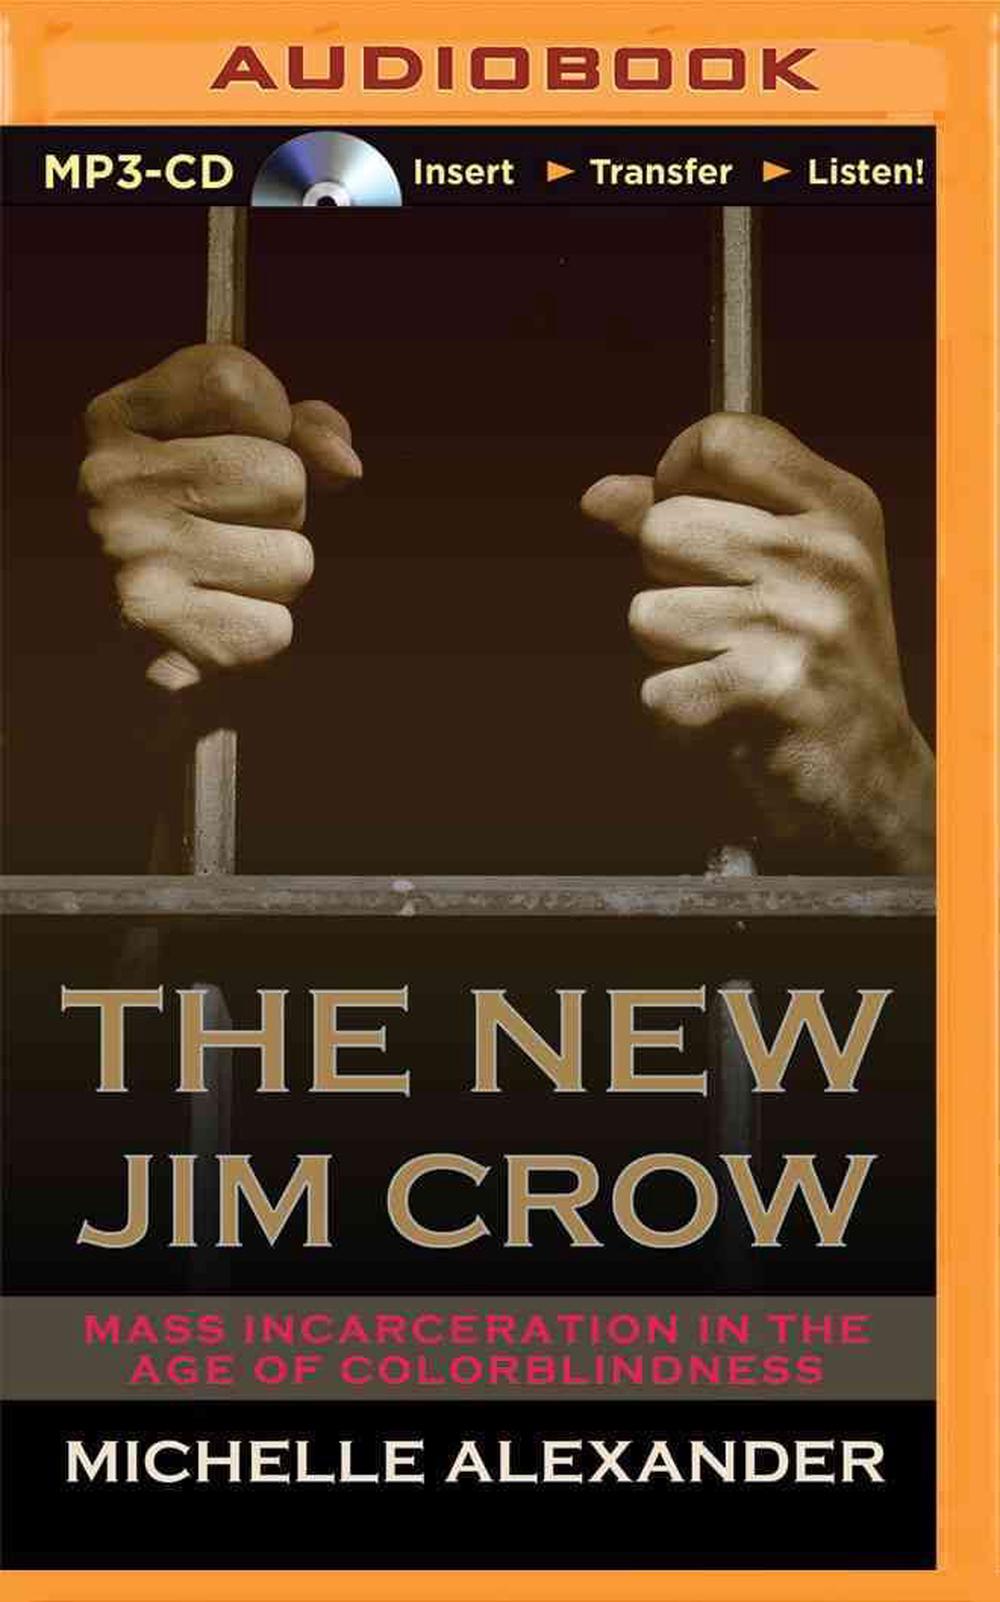 The New Jim Crow: Mass Incarceration in the Age of Colorblindness by ...